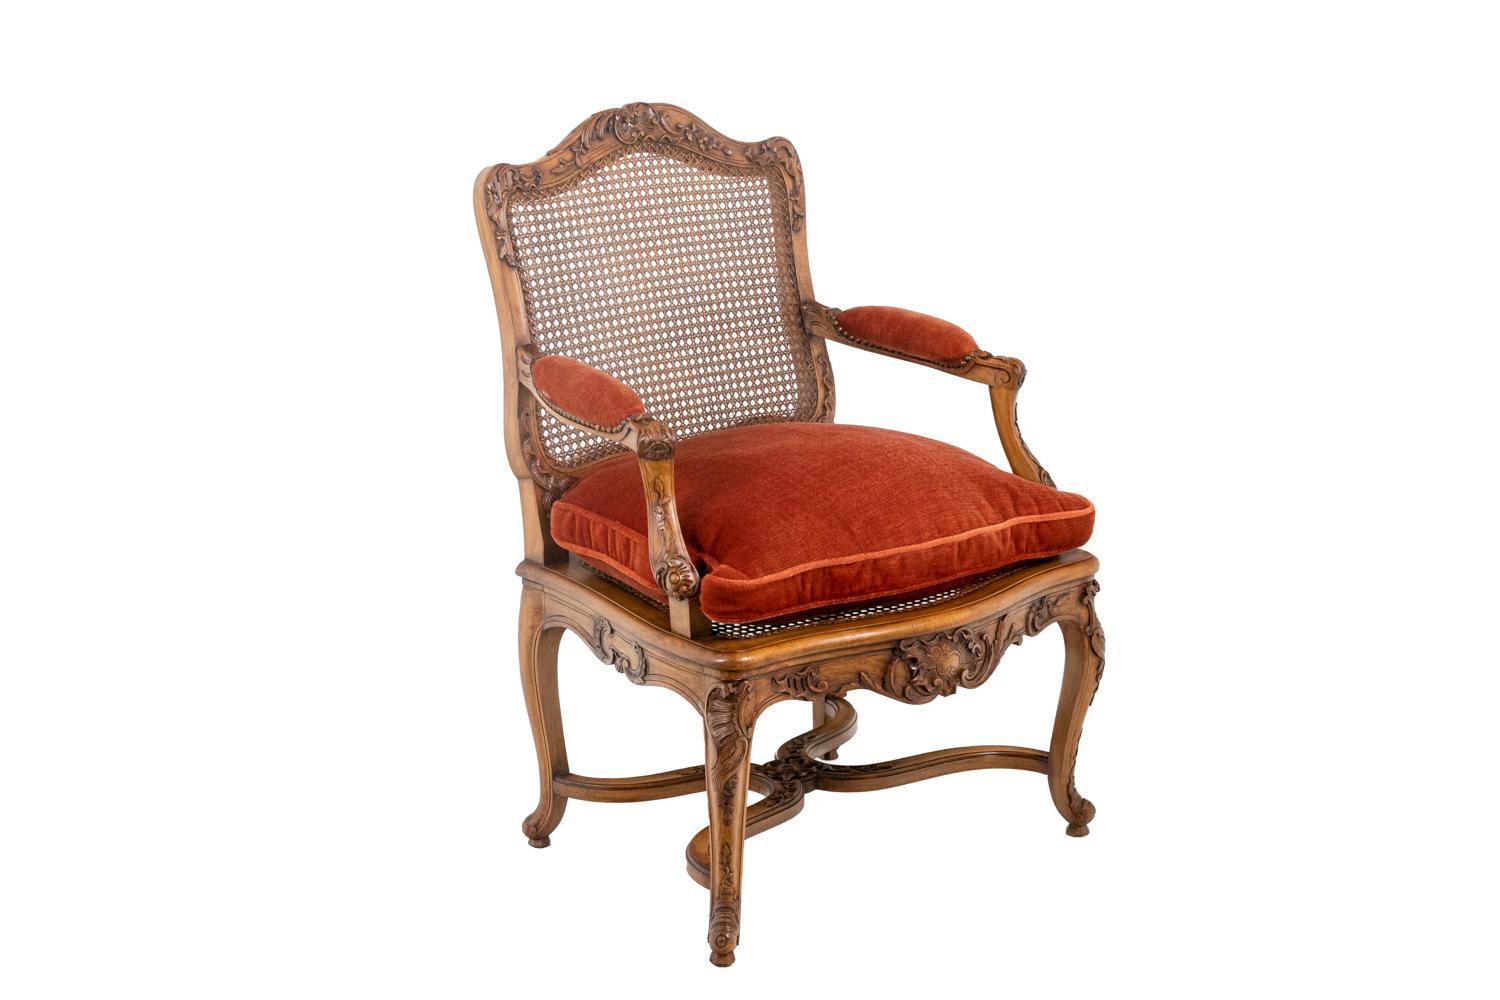 Ean Mocqué, stamp.
Louis Cresson, in the style of. 
Pair of Regency style armchairs in beech. Cane back and seat. Backrest and belt adorned with flowers, foliage and shells. Armrests consoles set back from the line of the foot. Arched feet joined